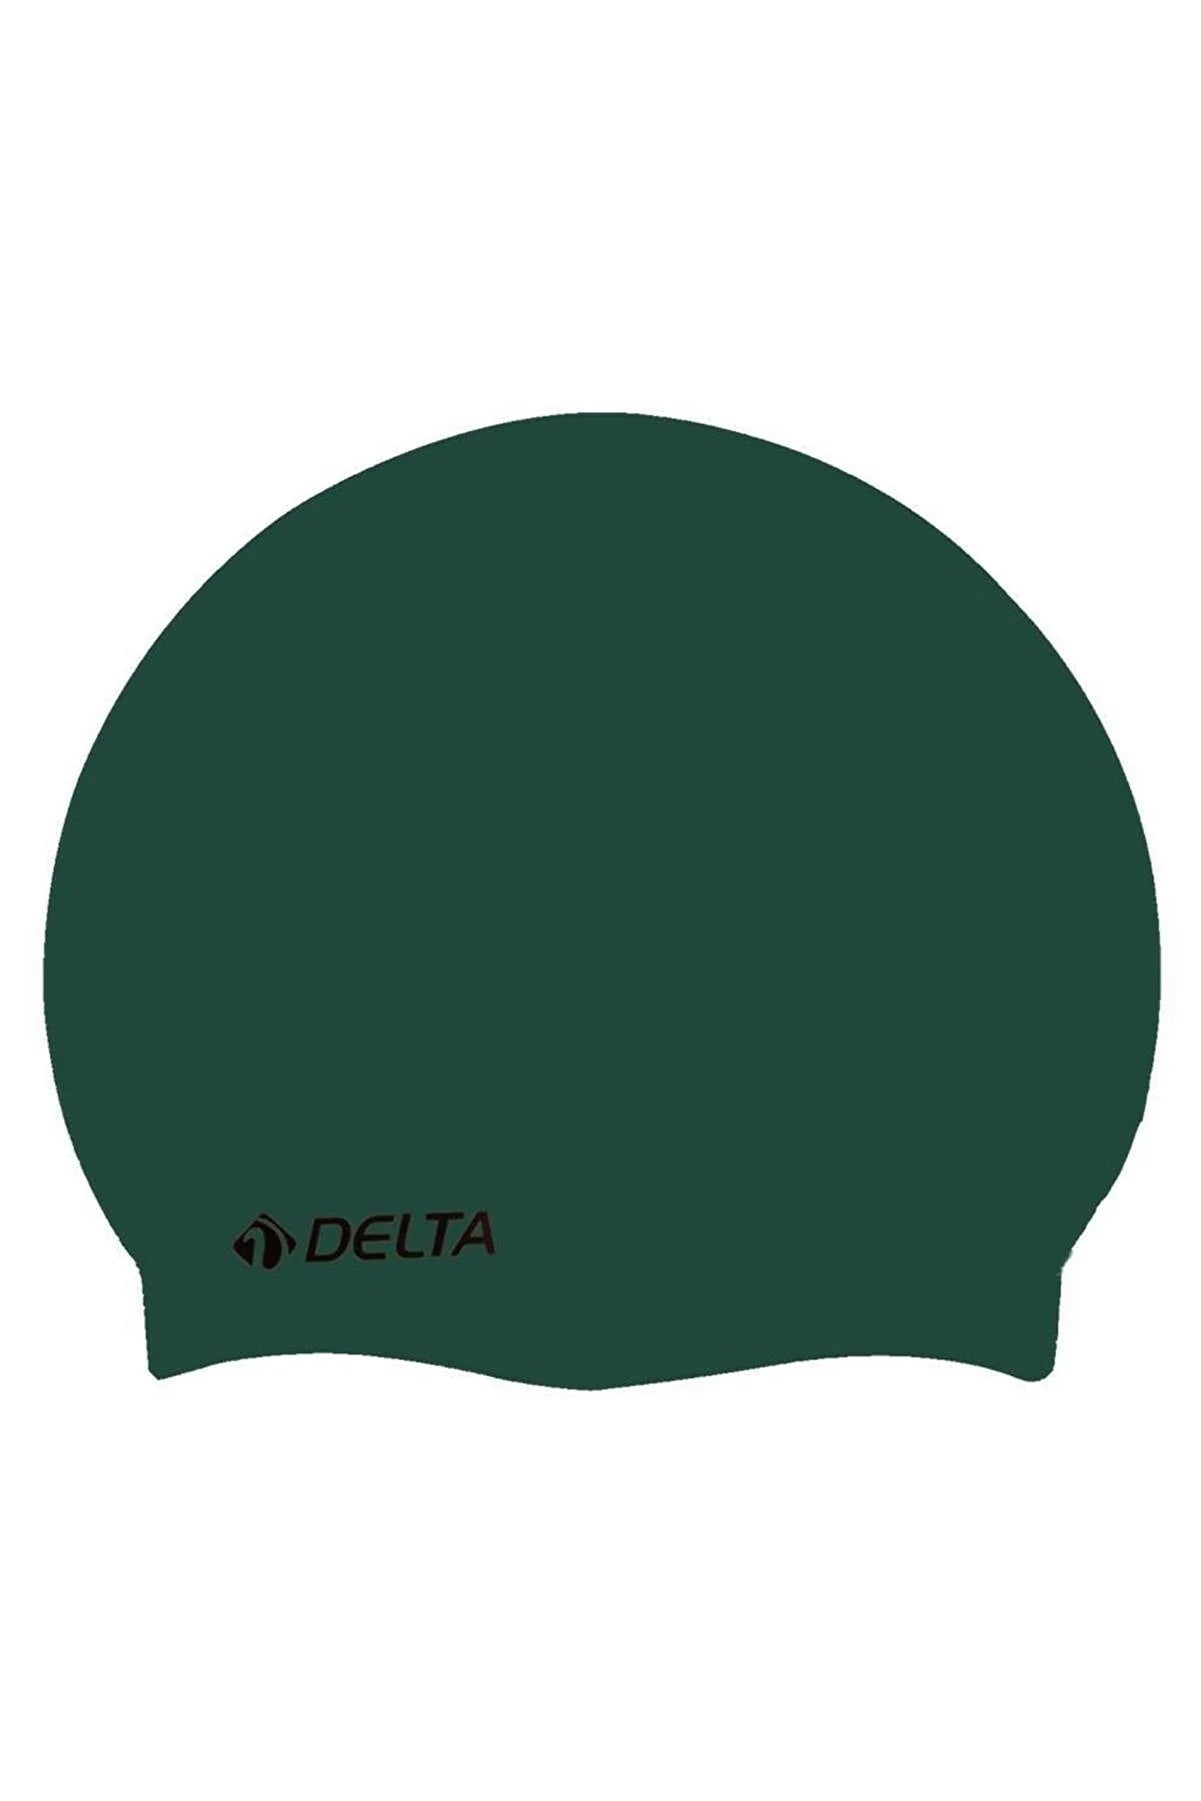 Silicone Bone Deluxe Swim Cap - Solid Green for Pool and Sea | Ideal for Braids, Dreadlocks, and Long Hair | Includes Free Ear Plugs and PVC Storage Bag